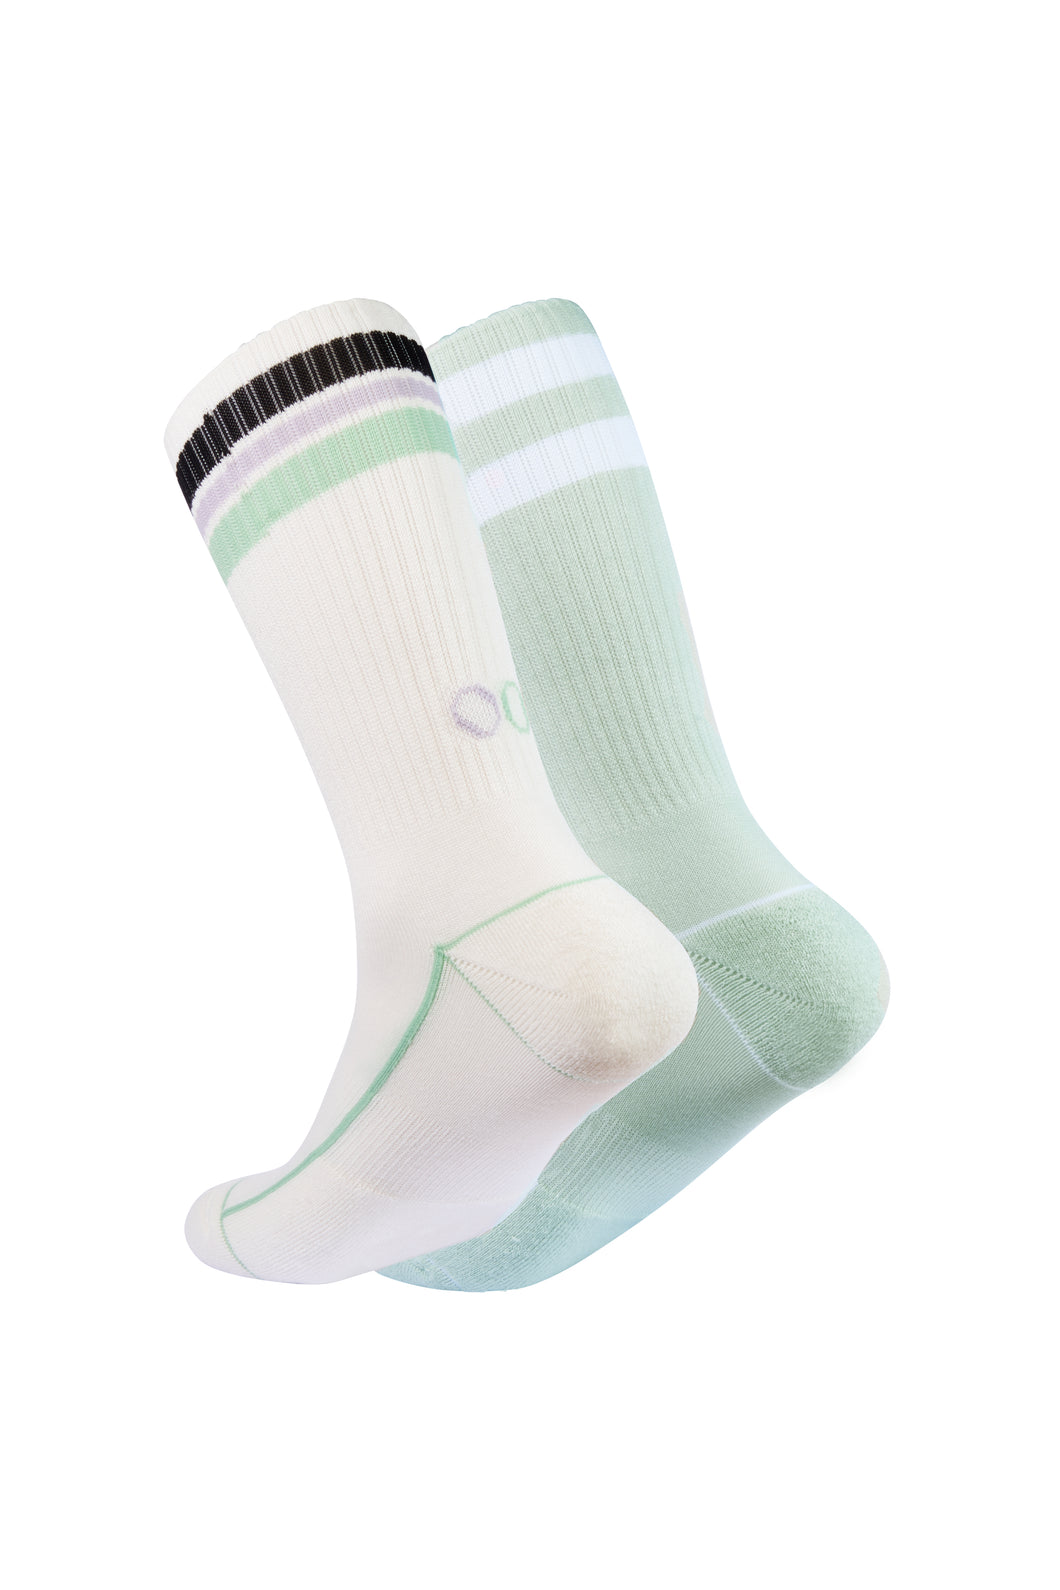 OOLEY Socks Casual 2 Pack Mint-White